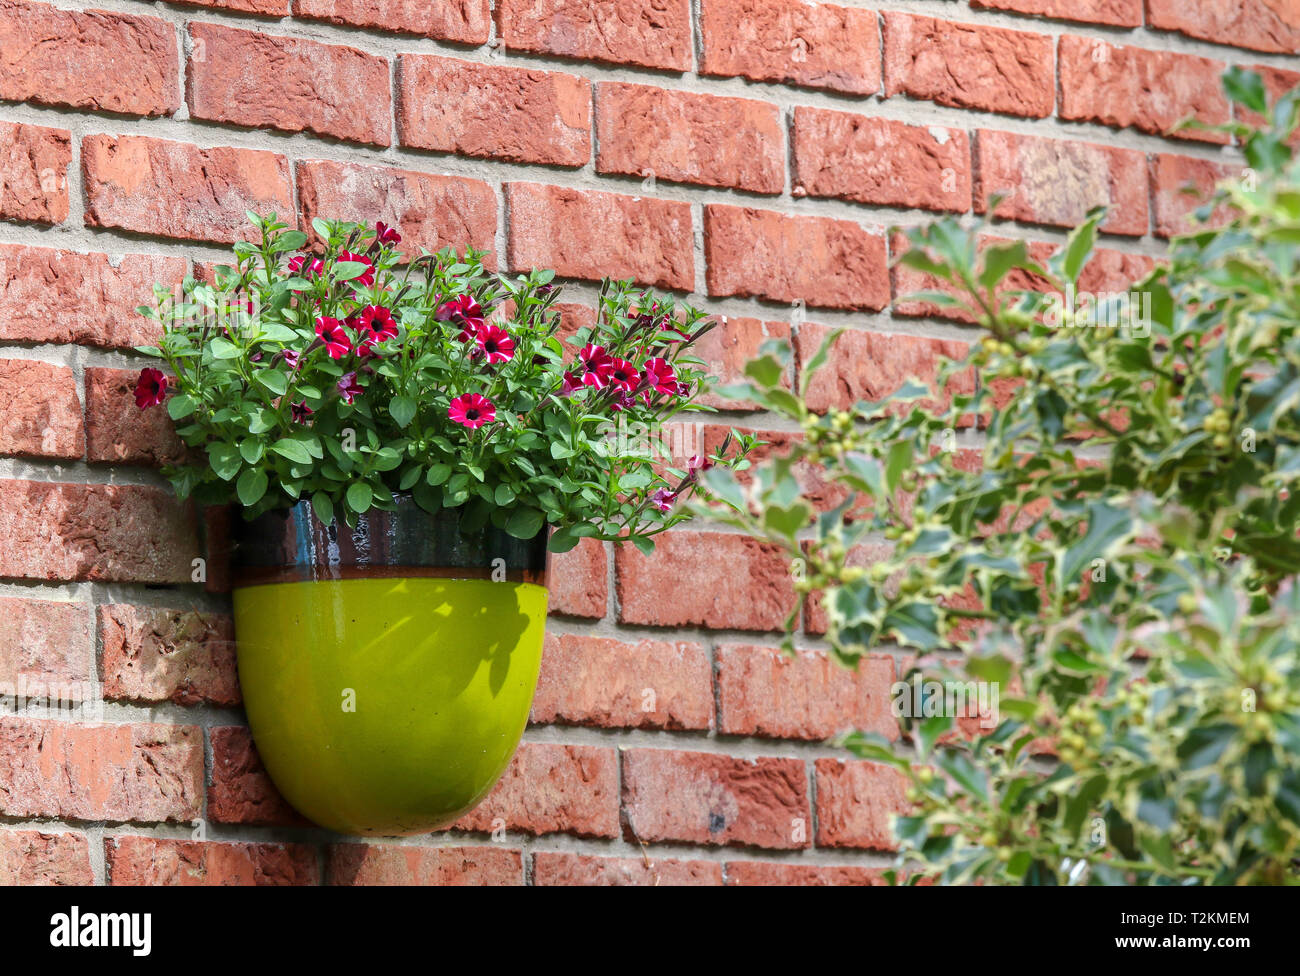 Garden plant container mounted on redbrick wall Stock Photo